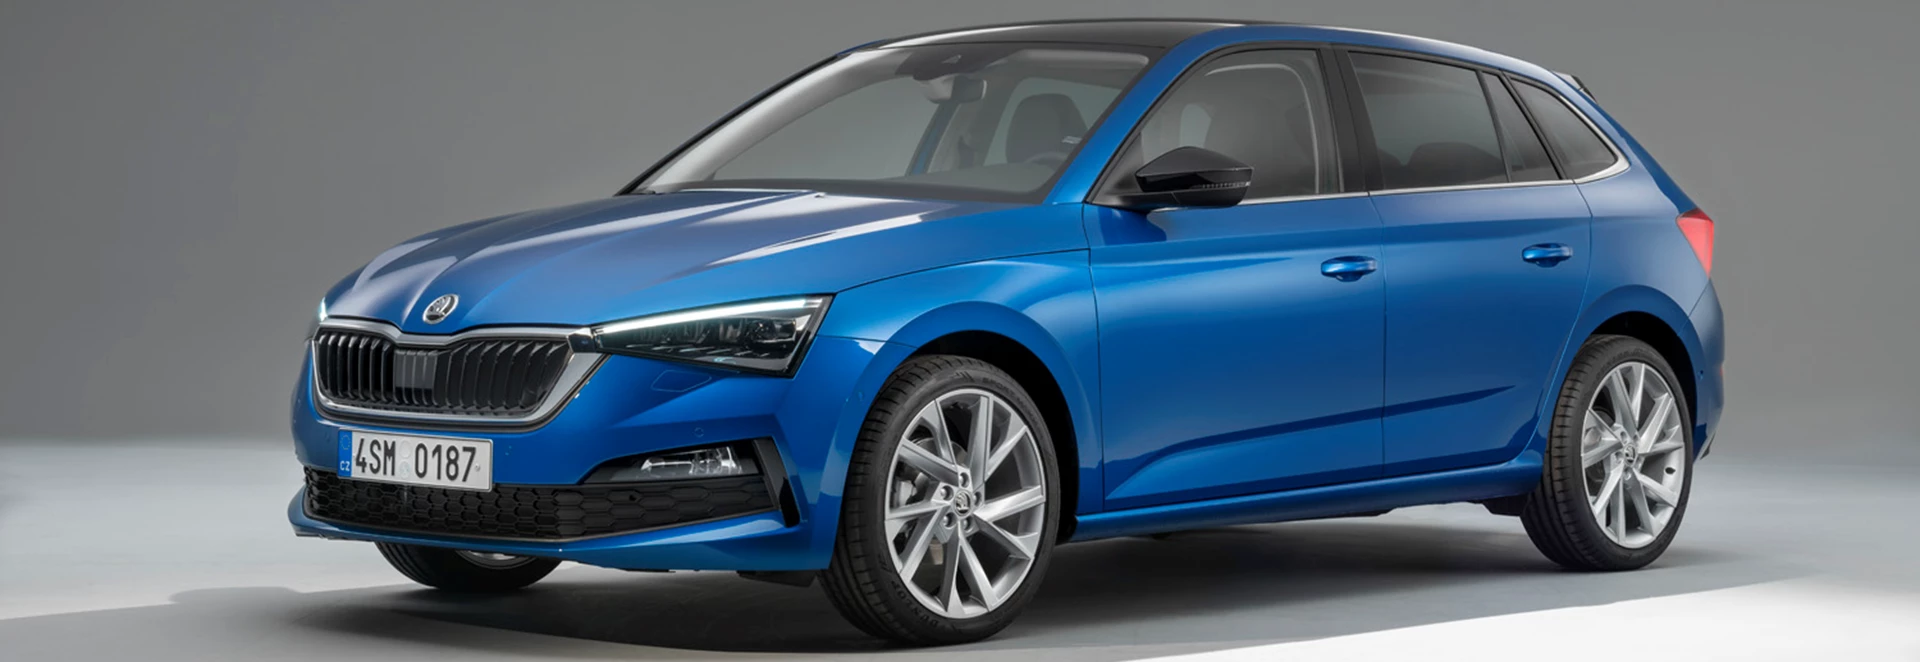 All we know about the upcoming 2019 Skoda Scala 